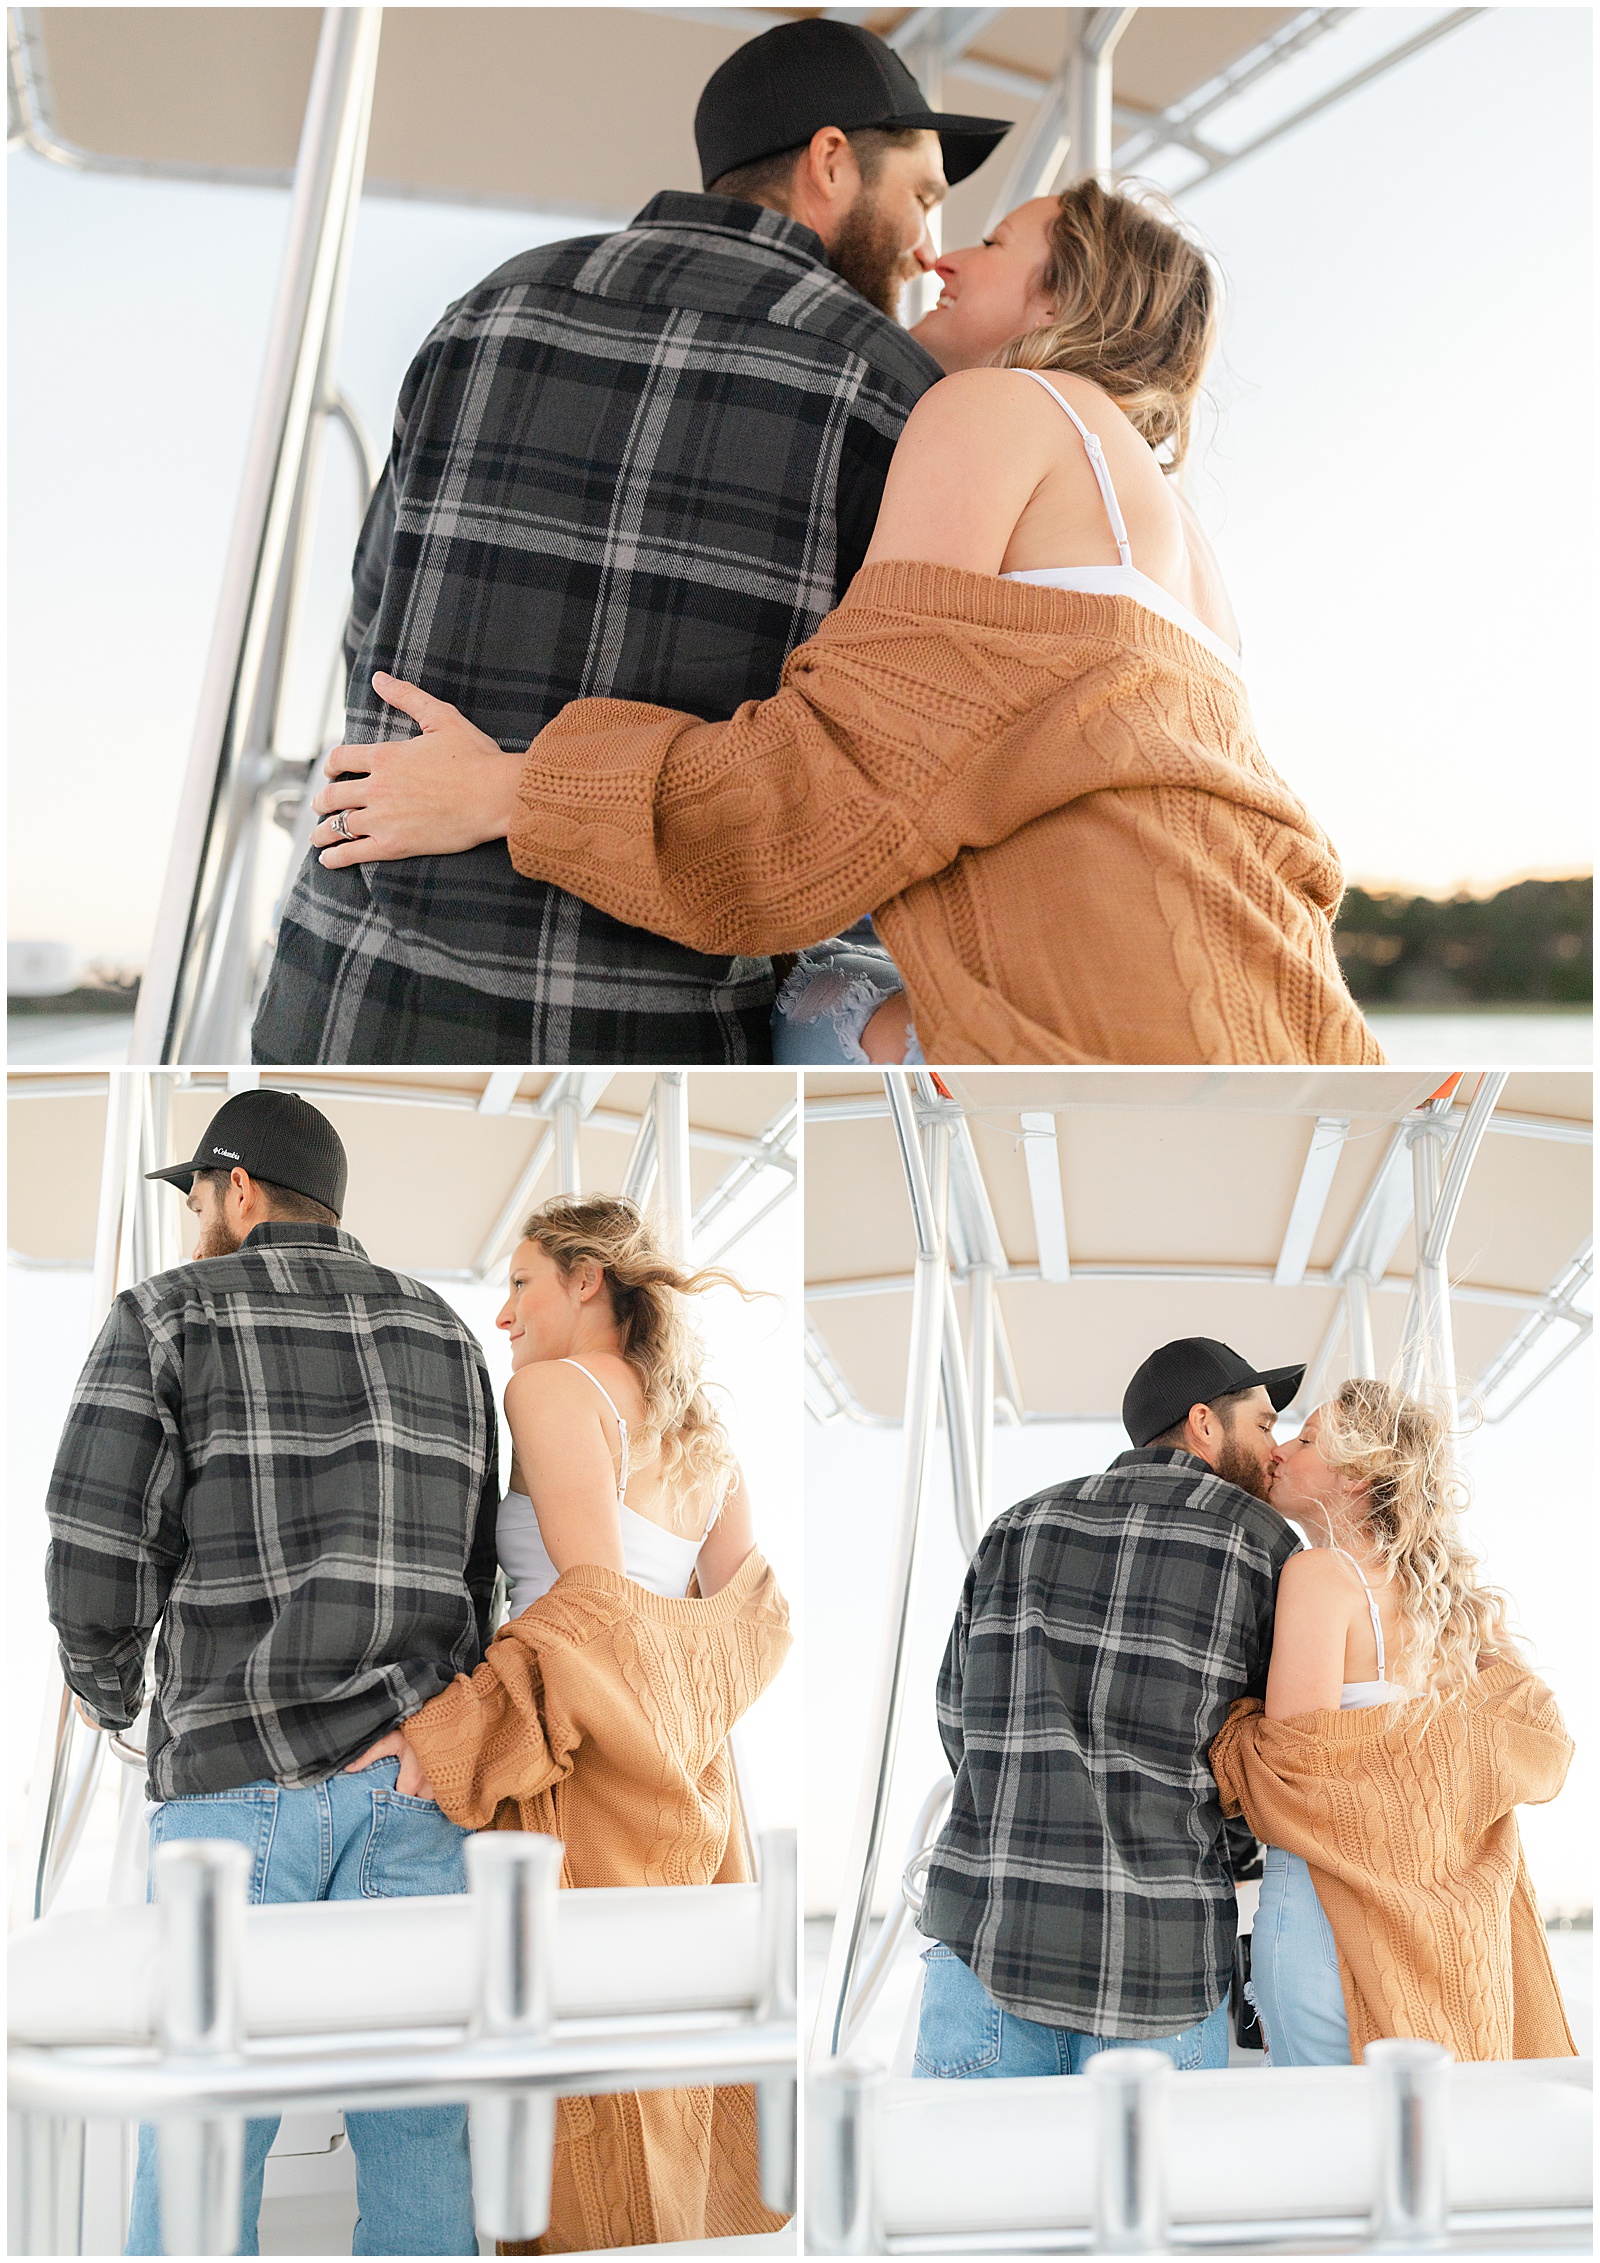 jacksonville florida couples boat anniversary photo session with tabitha baldwin photography_0018.jpg